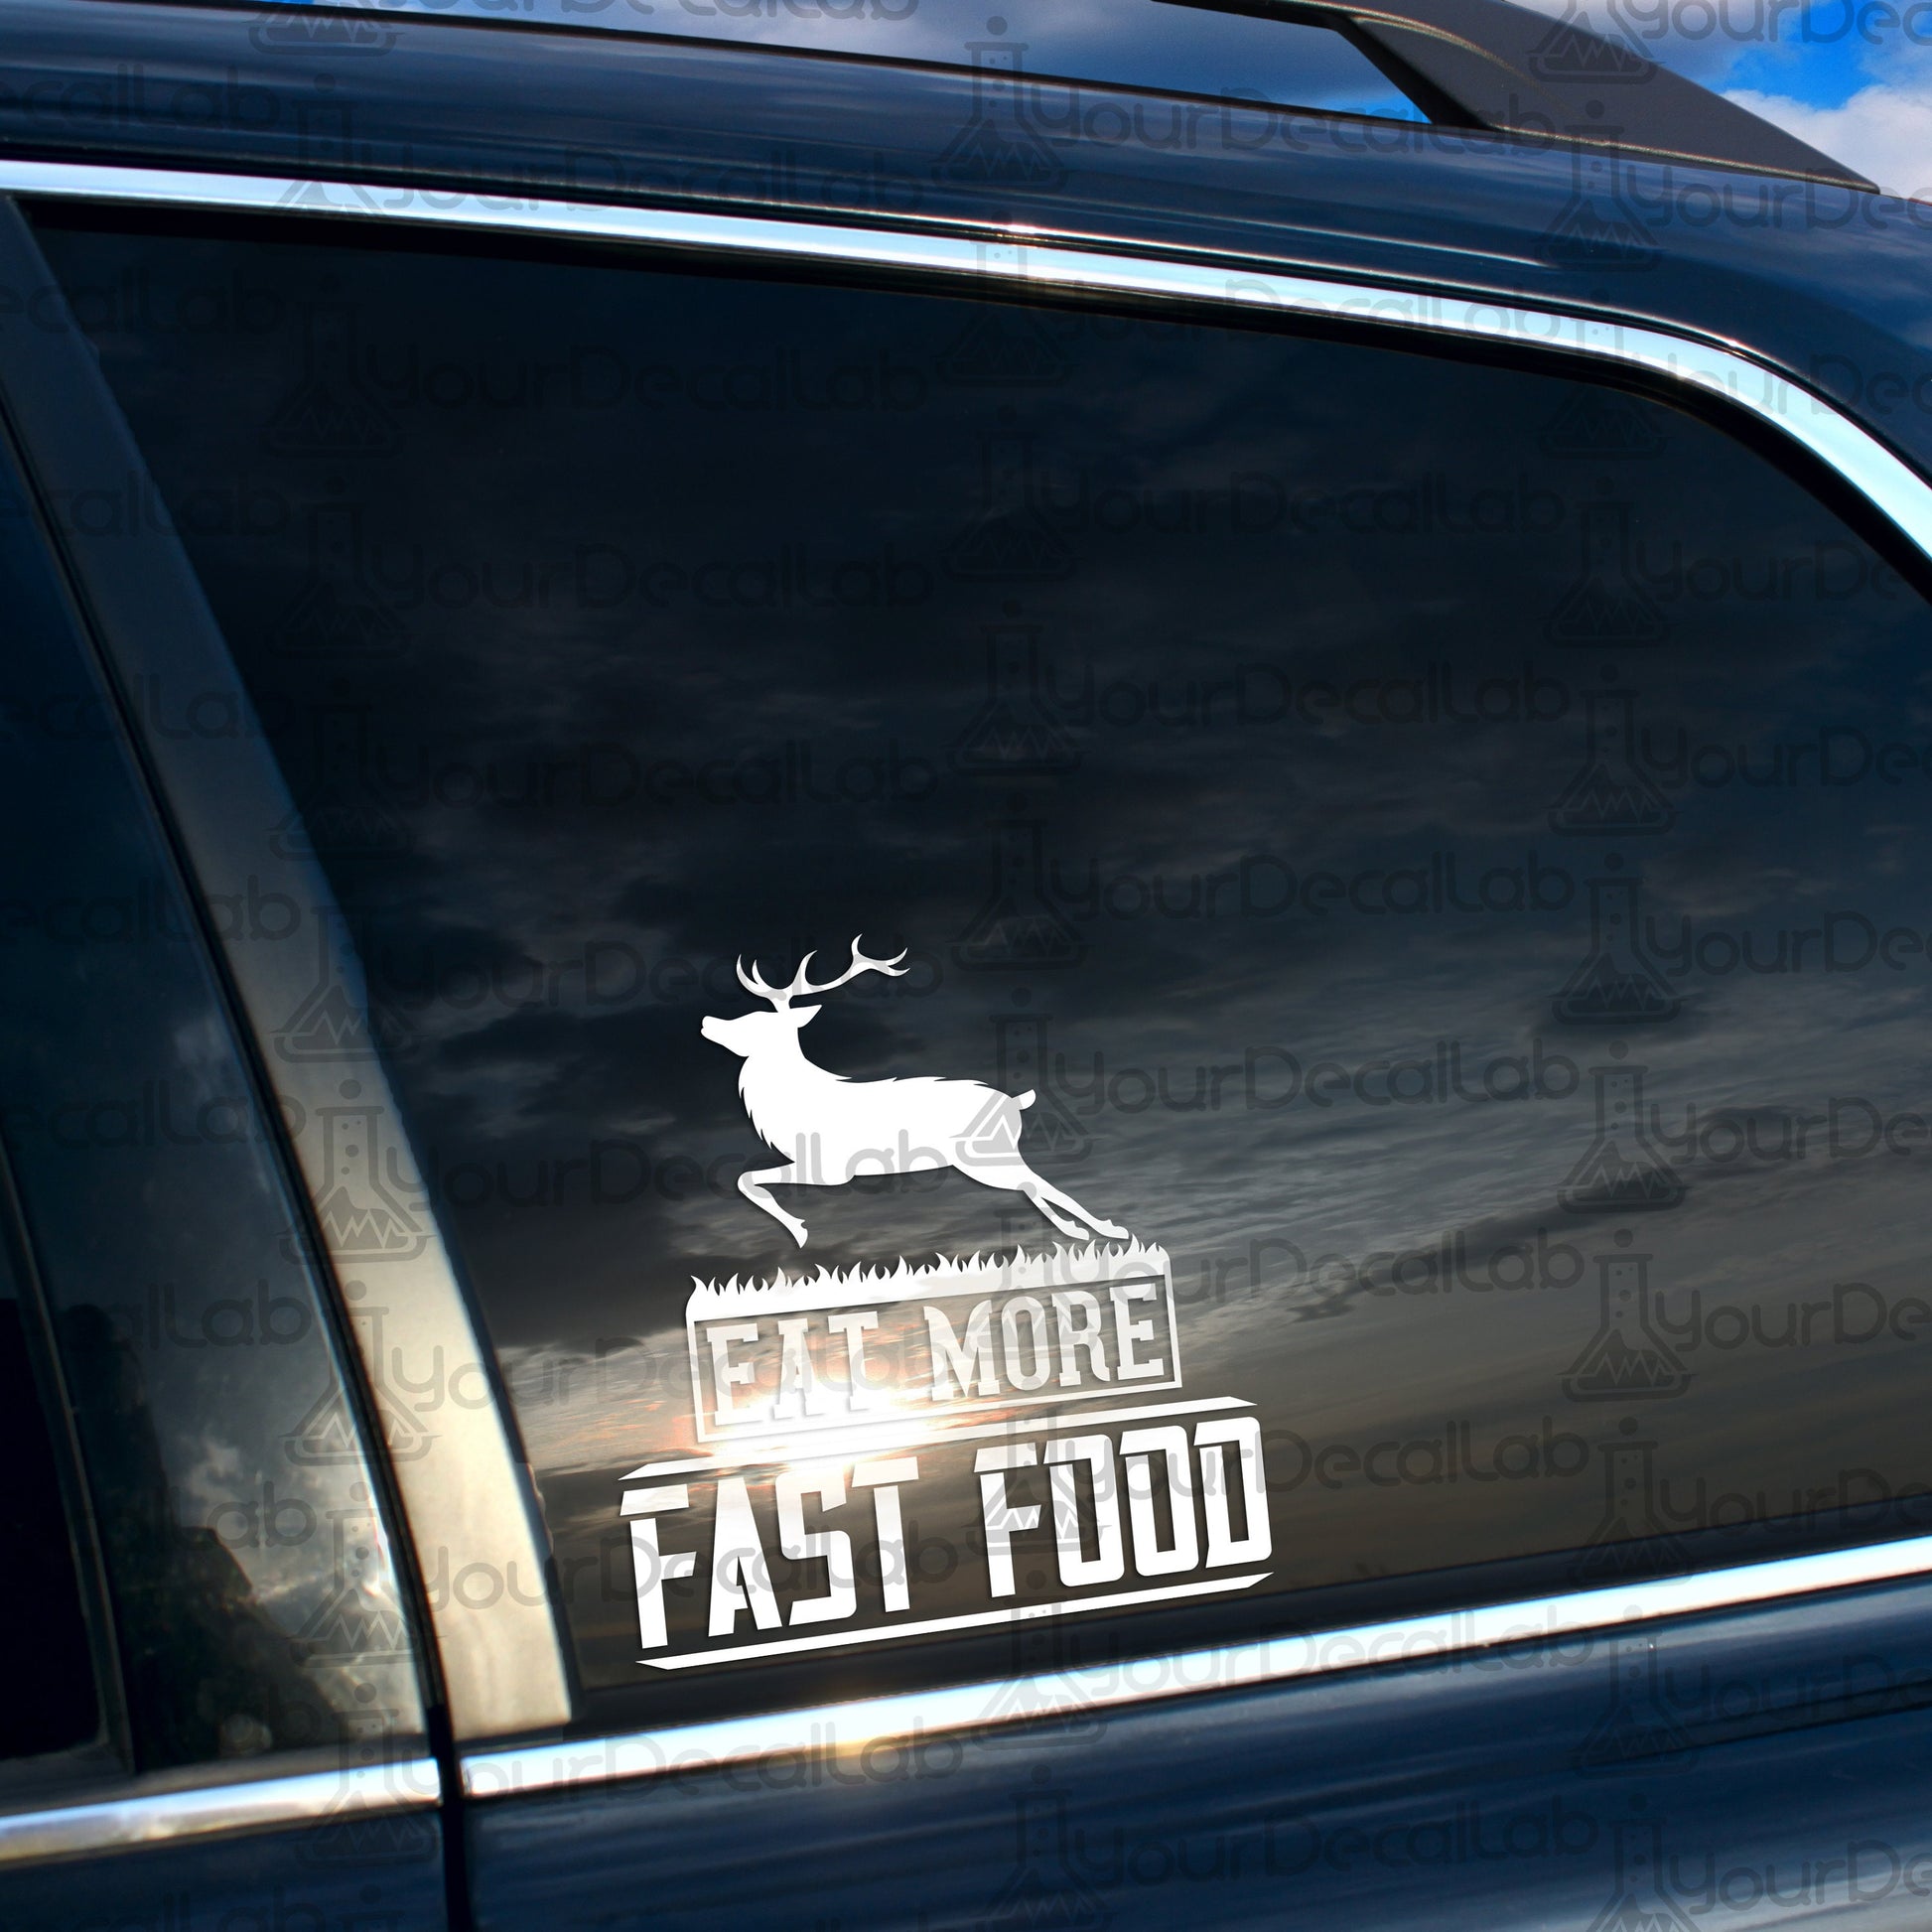 a sticker on the side of a car that says eat more fast food